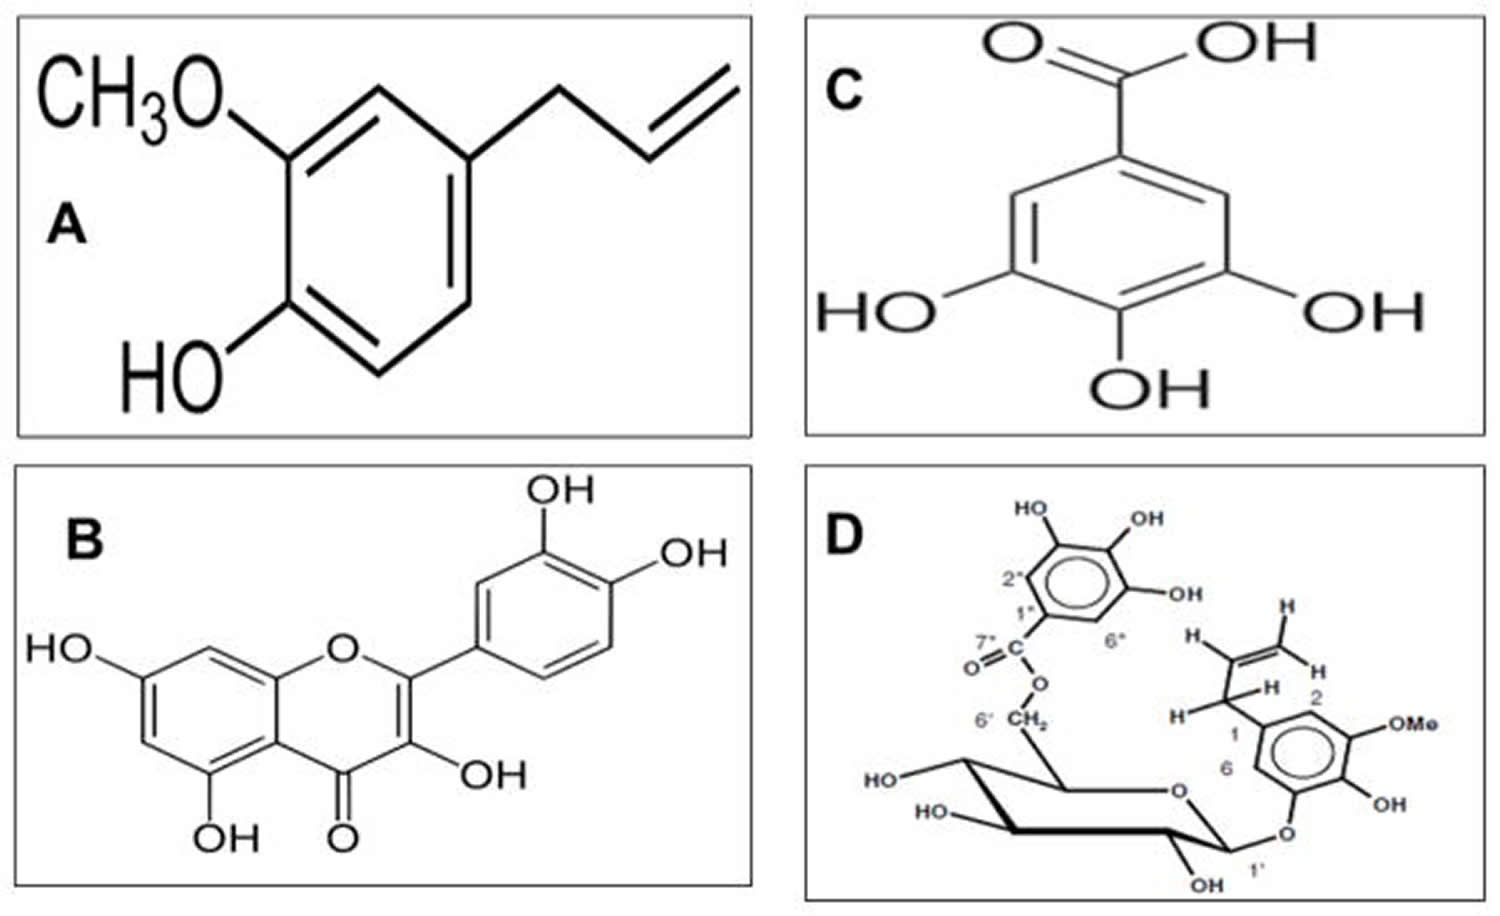 common phenolic compounds isolated from Allspice